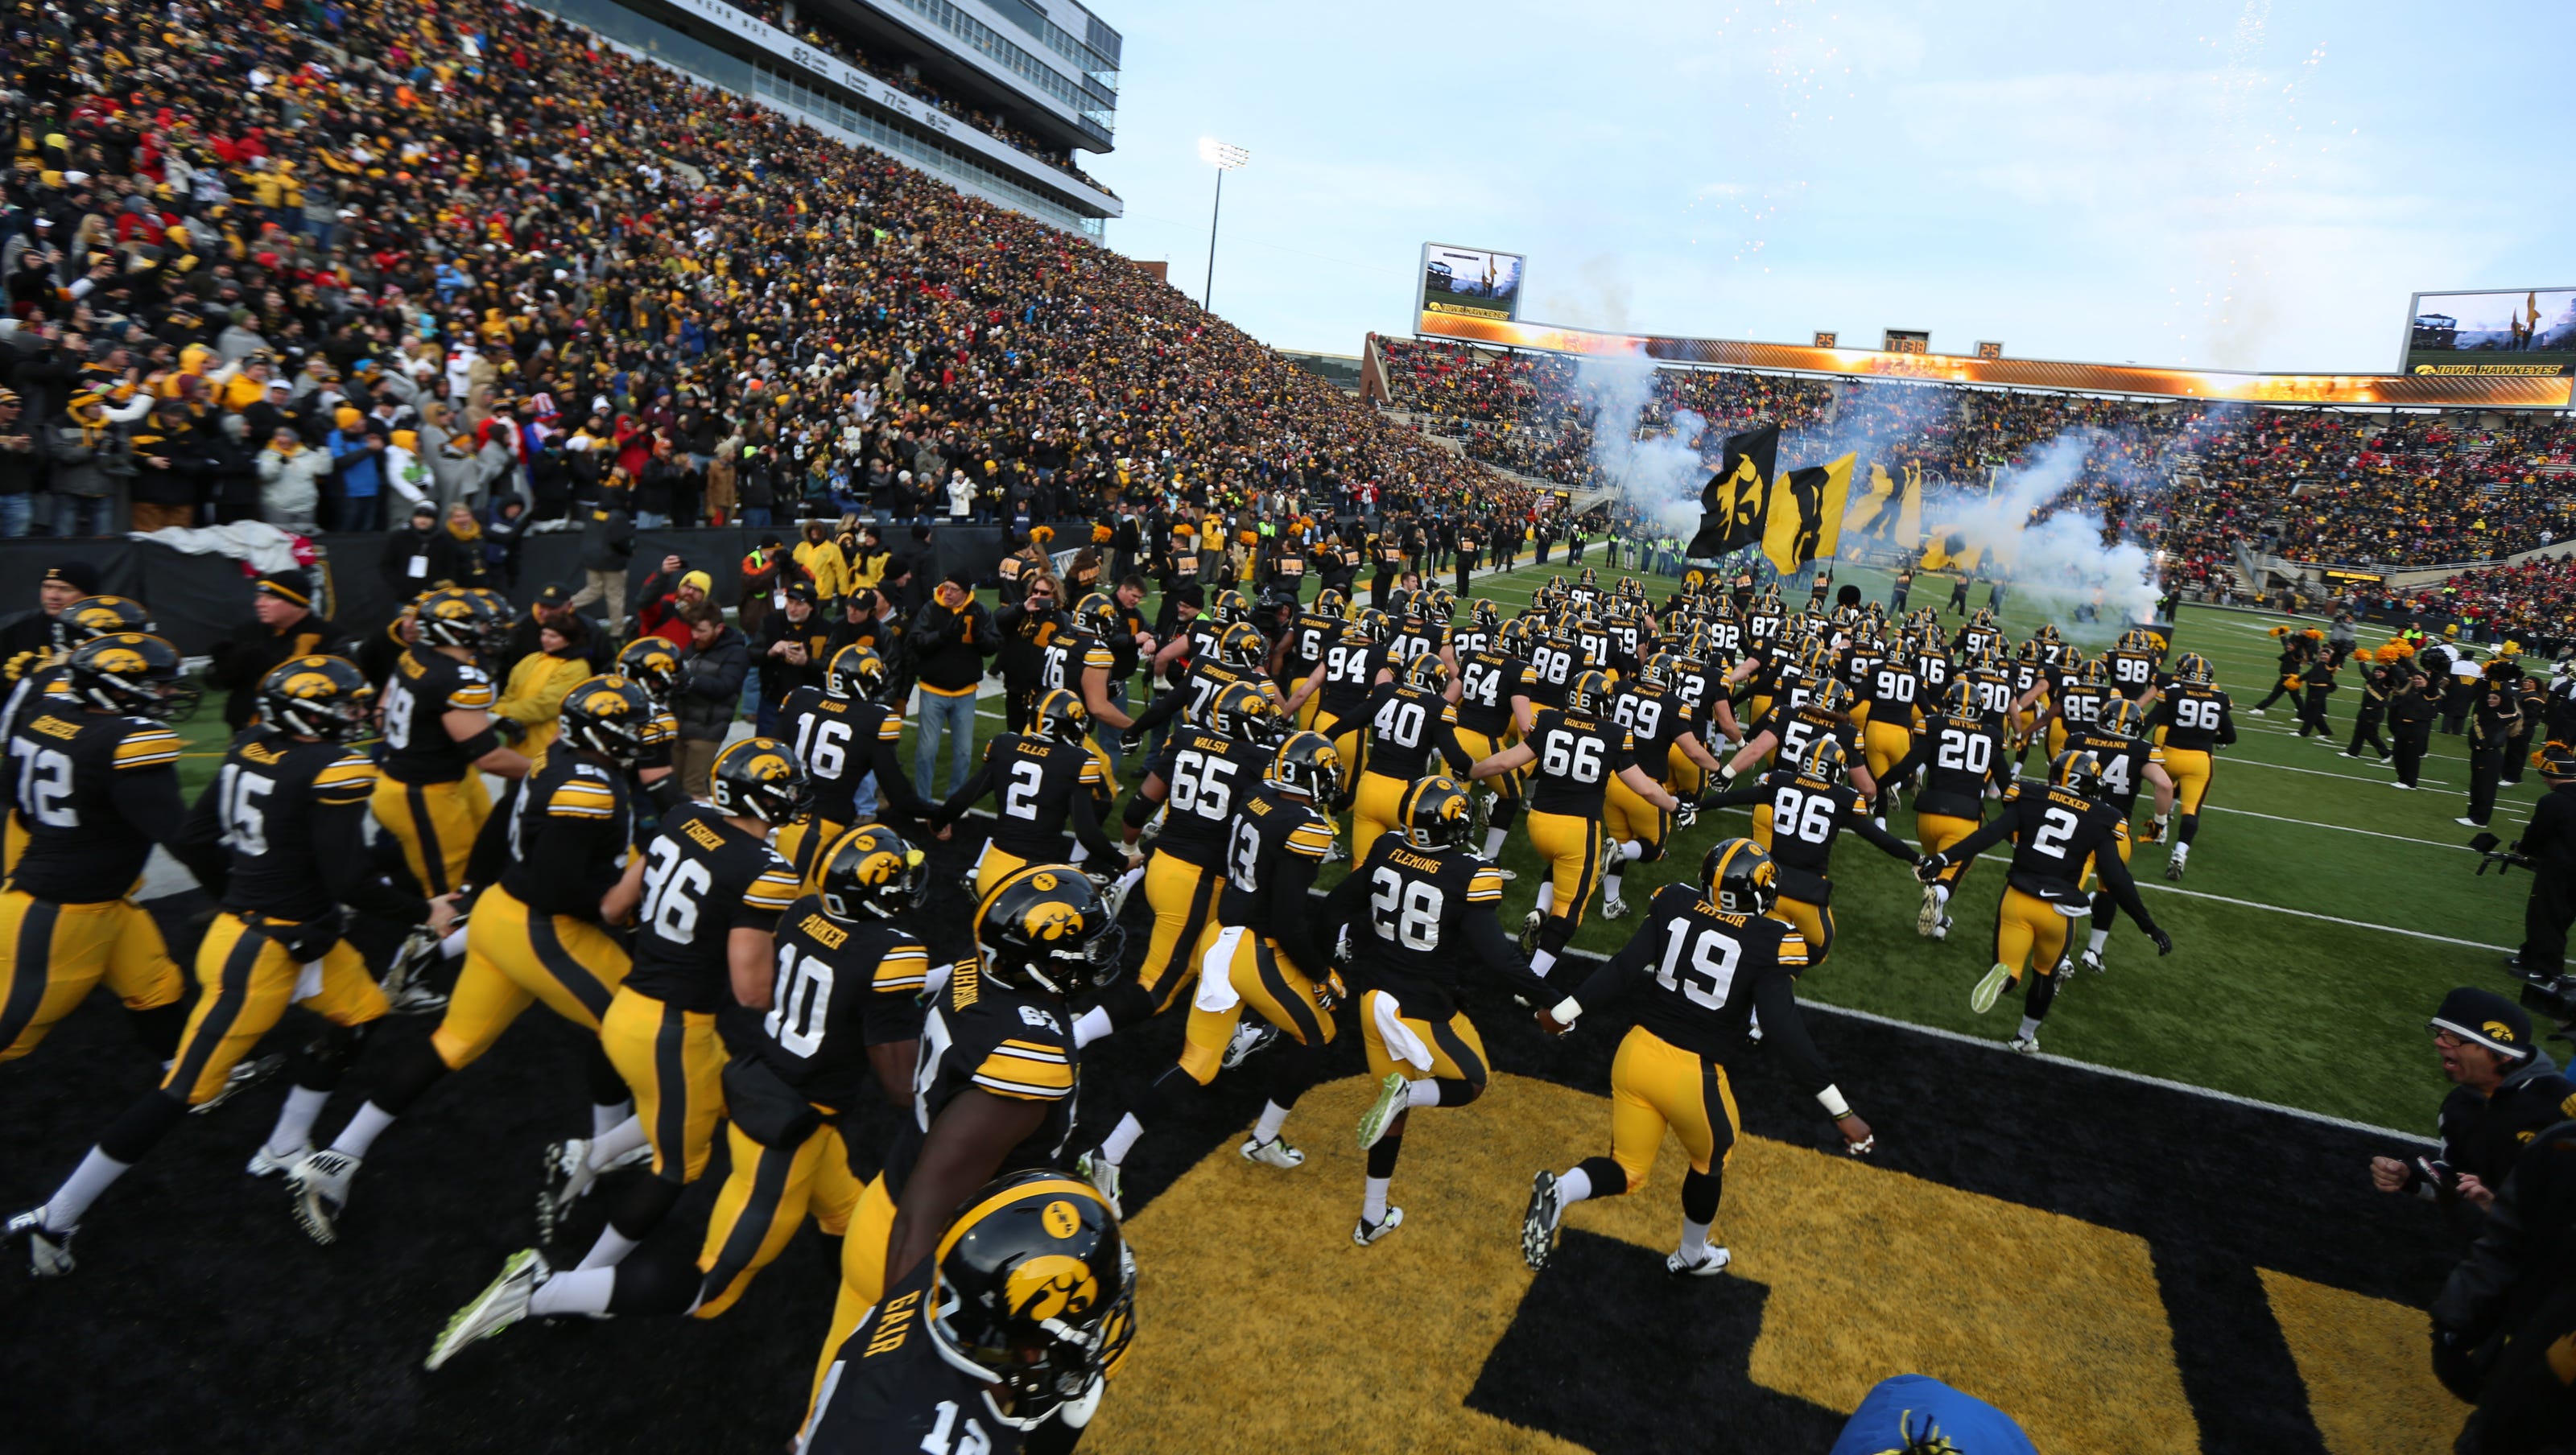 This Iowa Hawkeye football video will get you hyped for the season